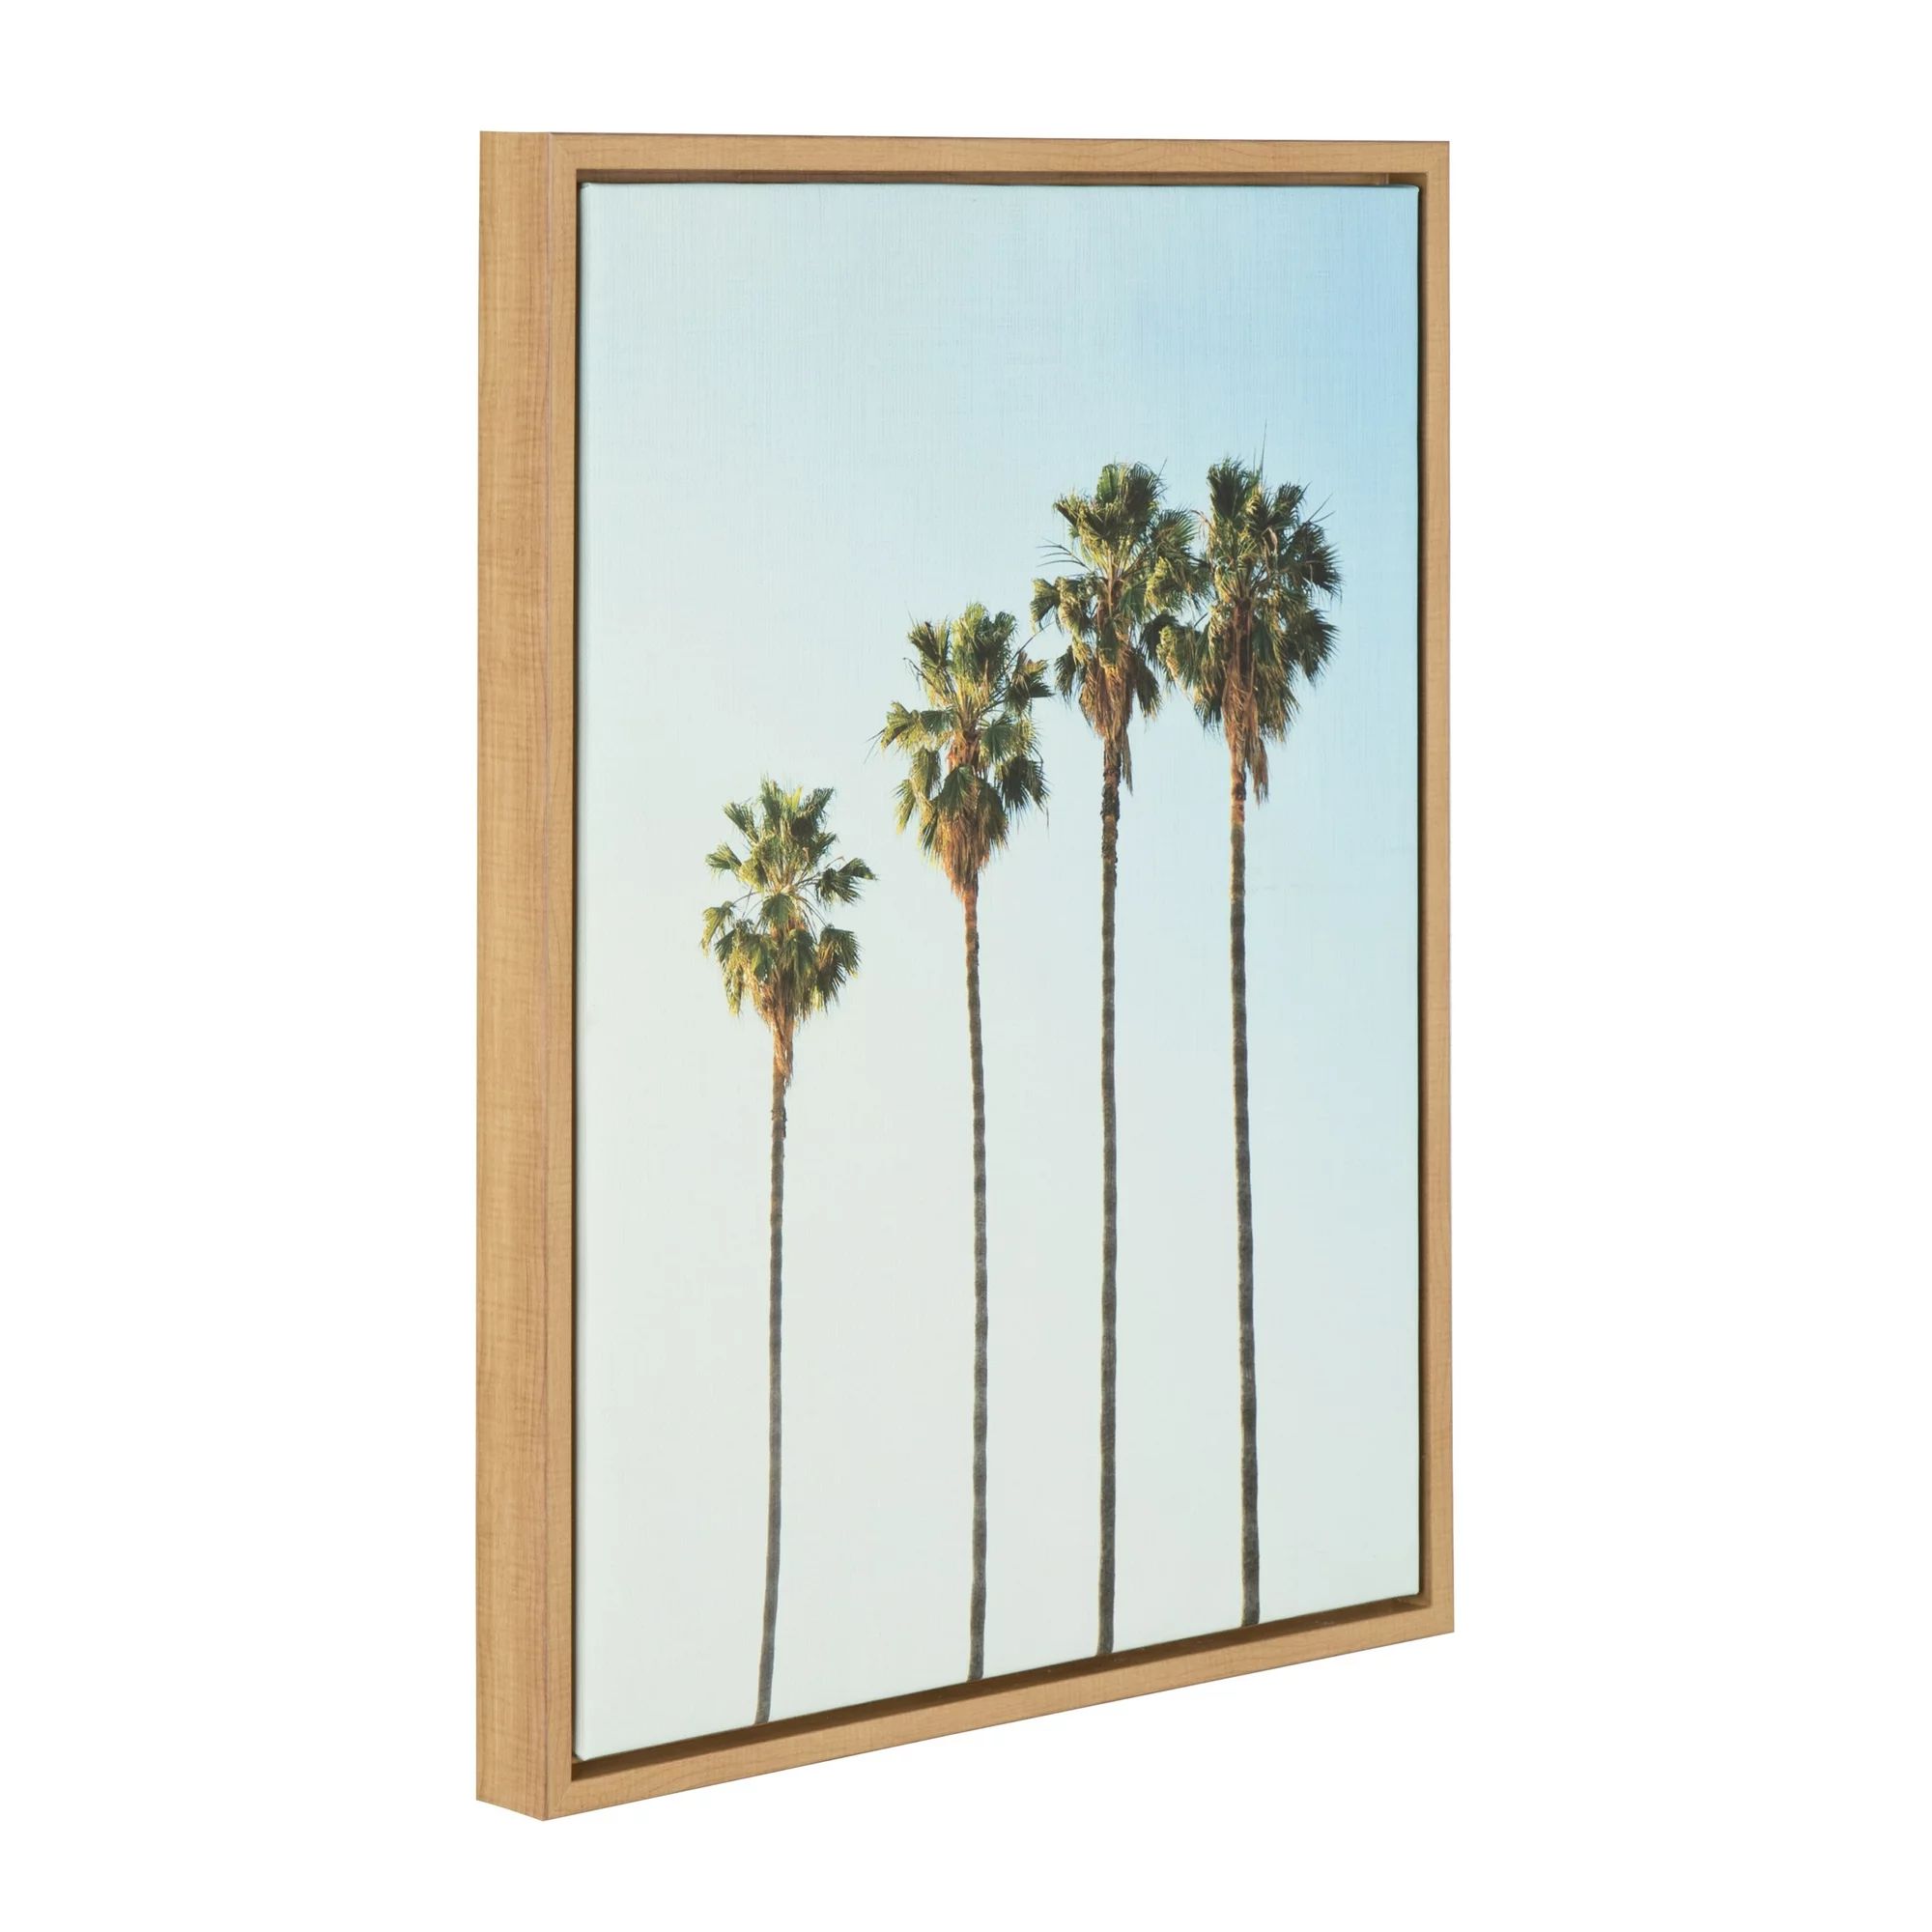 Kate and Laurel Sylvie Four Palm Trees Framed Canvas Wall Art by Simon Te Tai, 18x24 Natural | Walmart (US)